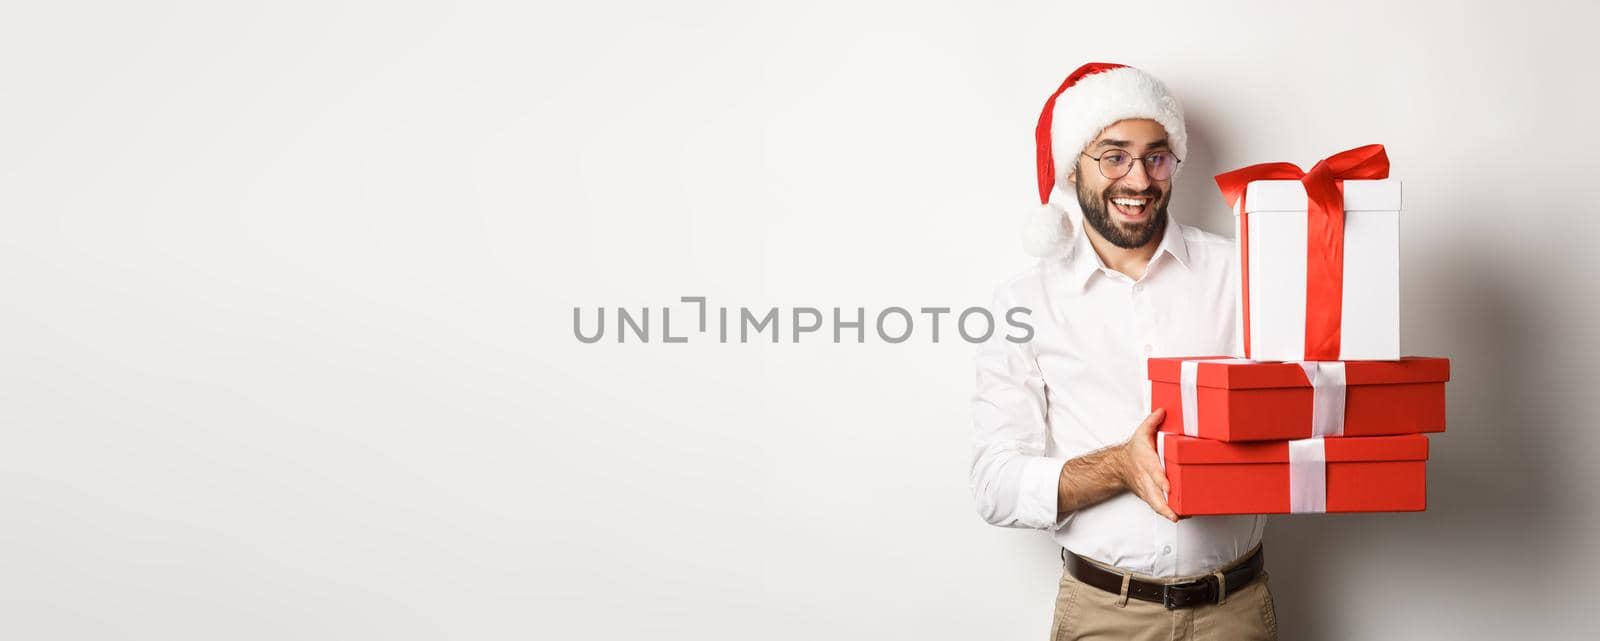 Winter holidays and celebration. Happy guy bring christmas presents, holding gifts and wearing Santa hat, standing over white background.